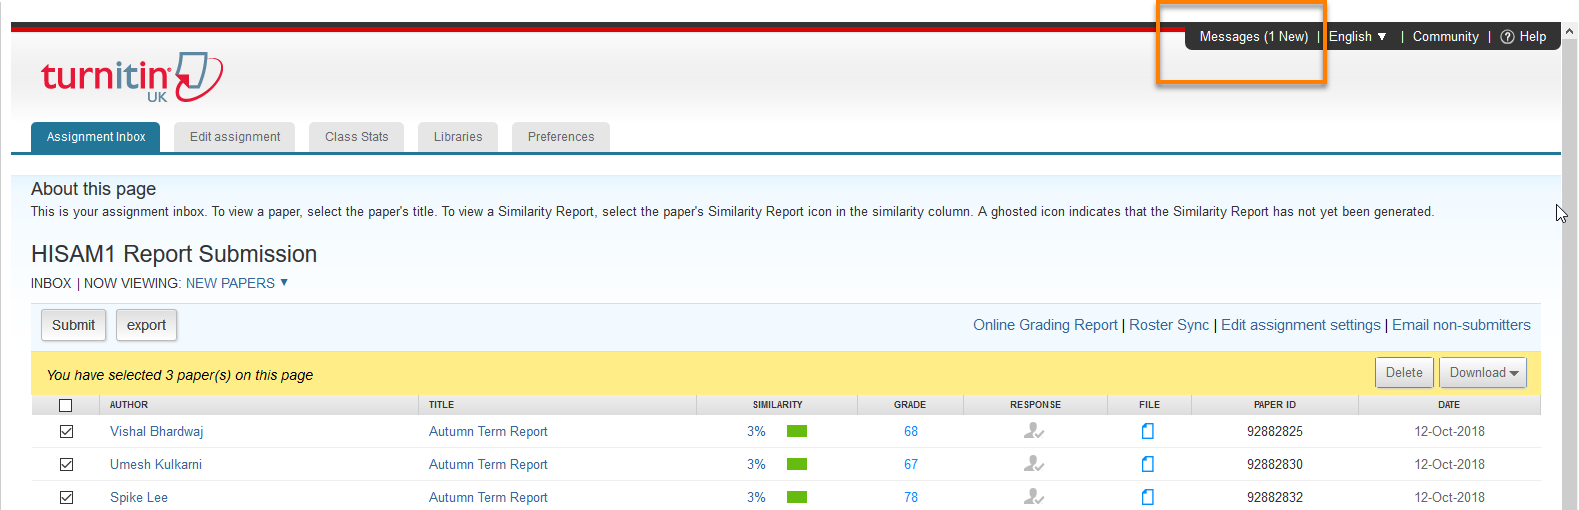 A view of the Turnitin Assignment Inbox accessing the Messages area